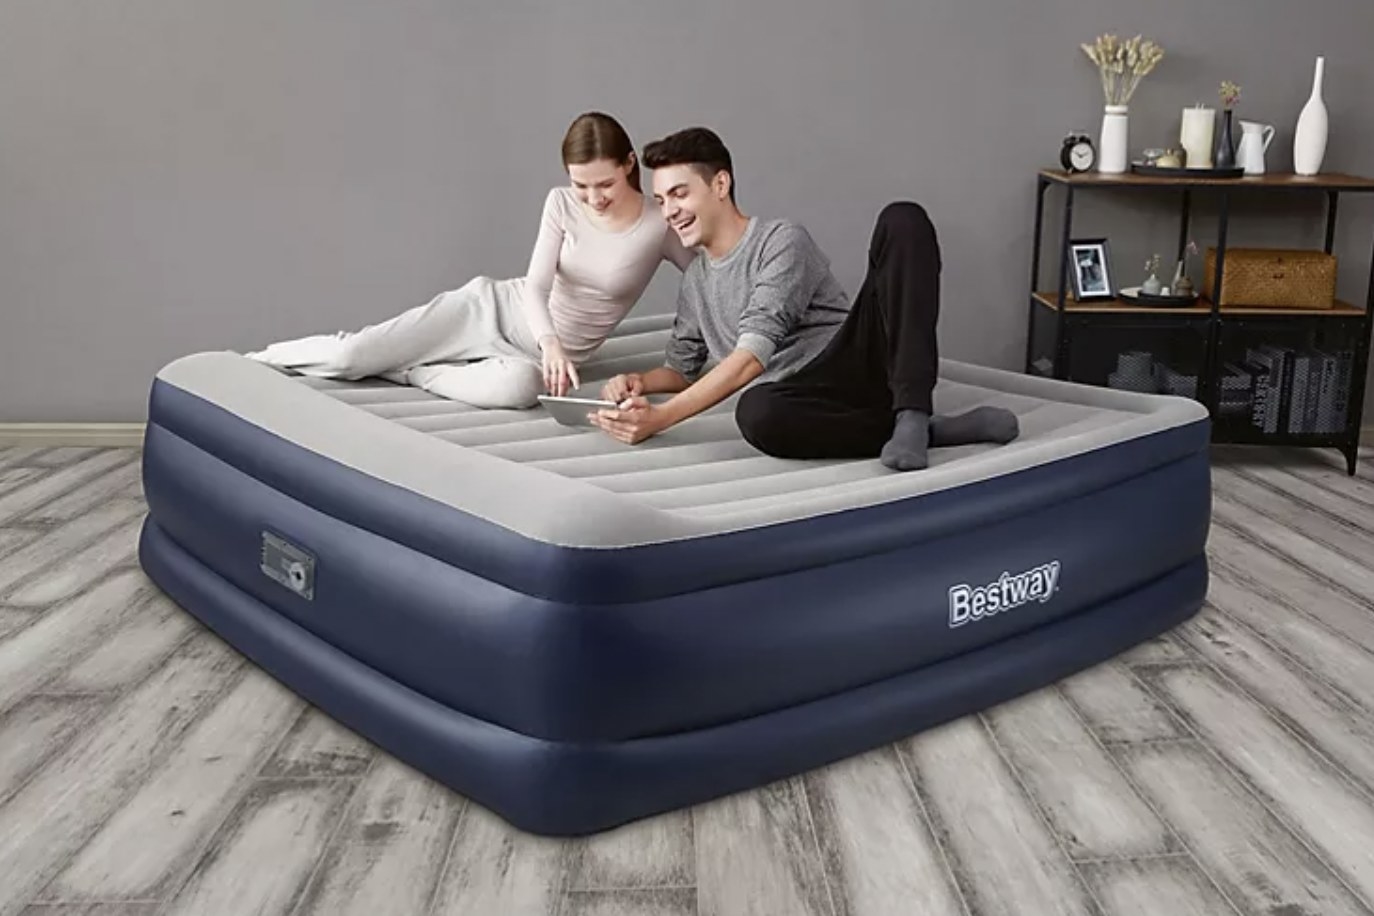 two people lounging on the air mattress playing on a tablet